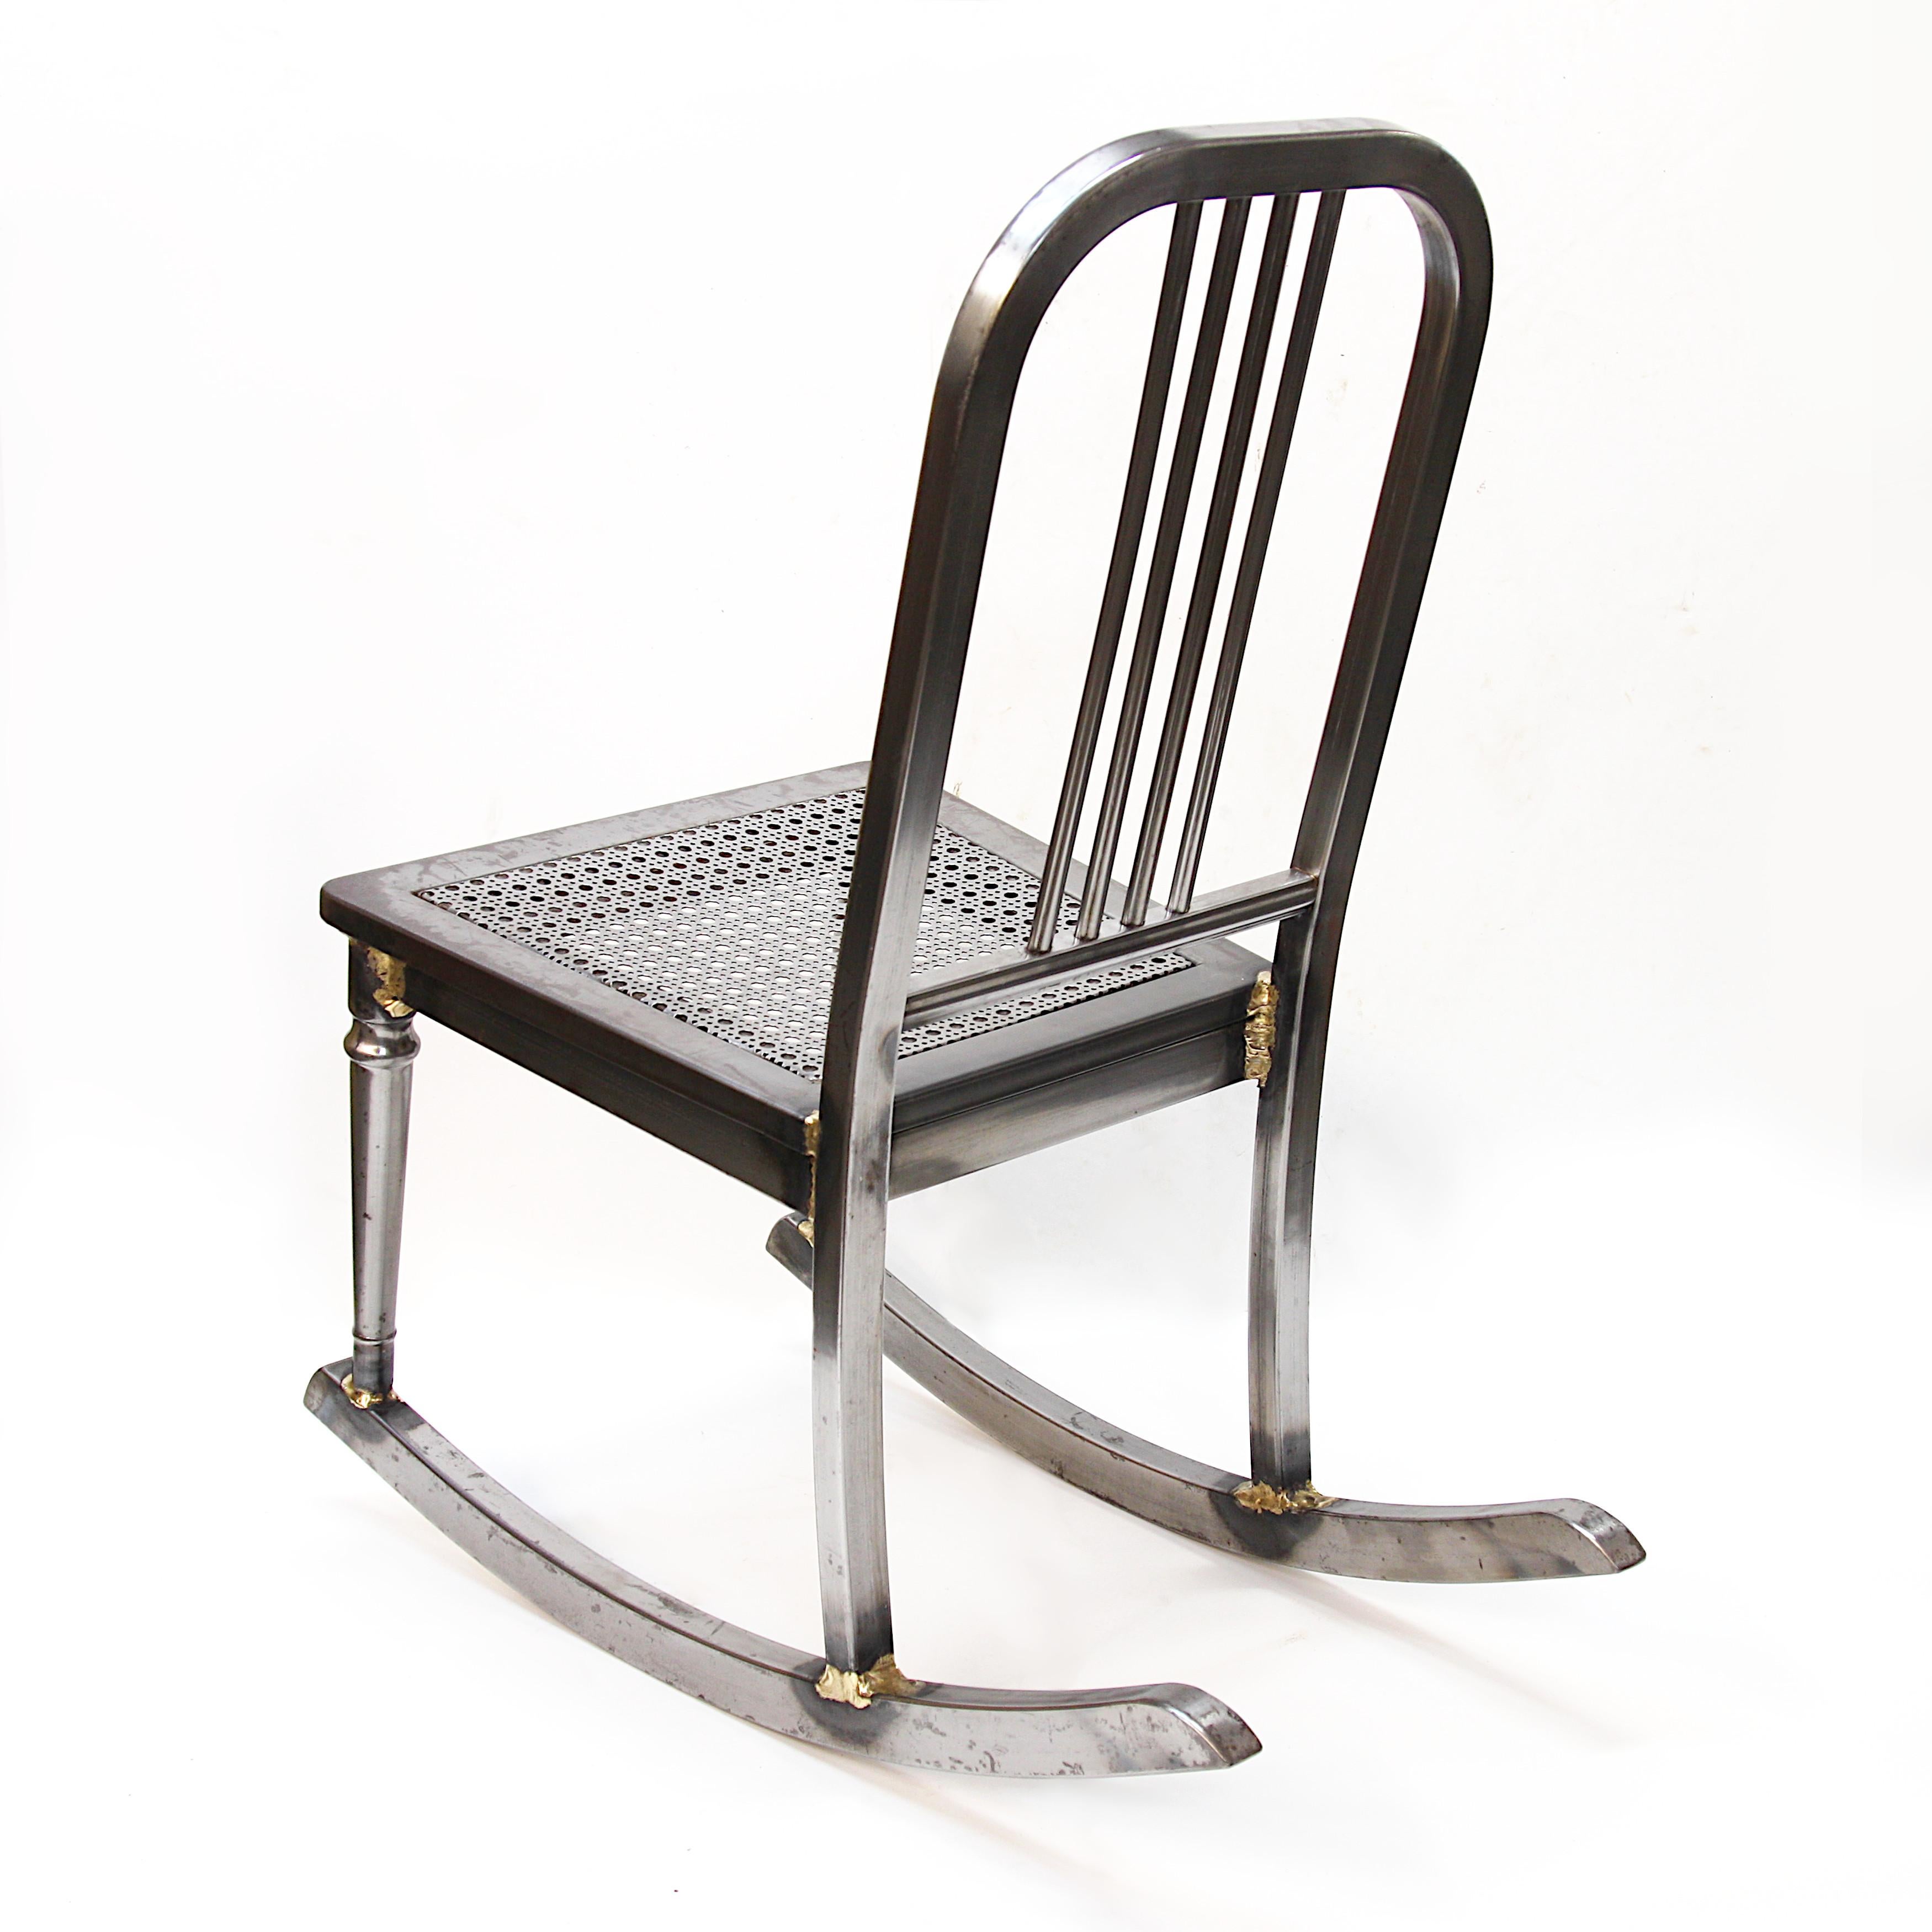 Very cool 1930's vintage rocking chair by the Simmons Mfg. Co. Chair features full steel construction with unique steel 